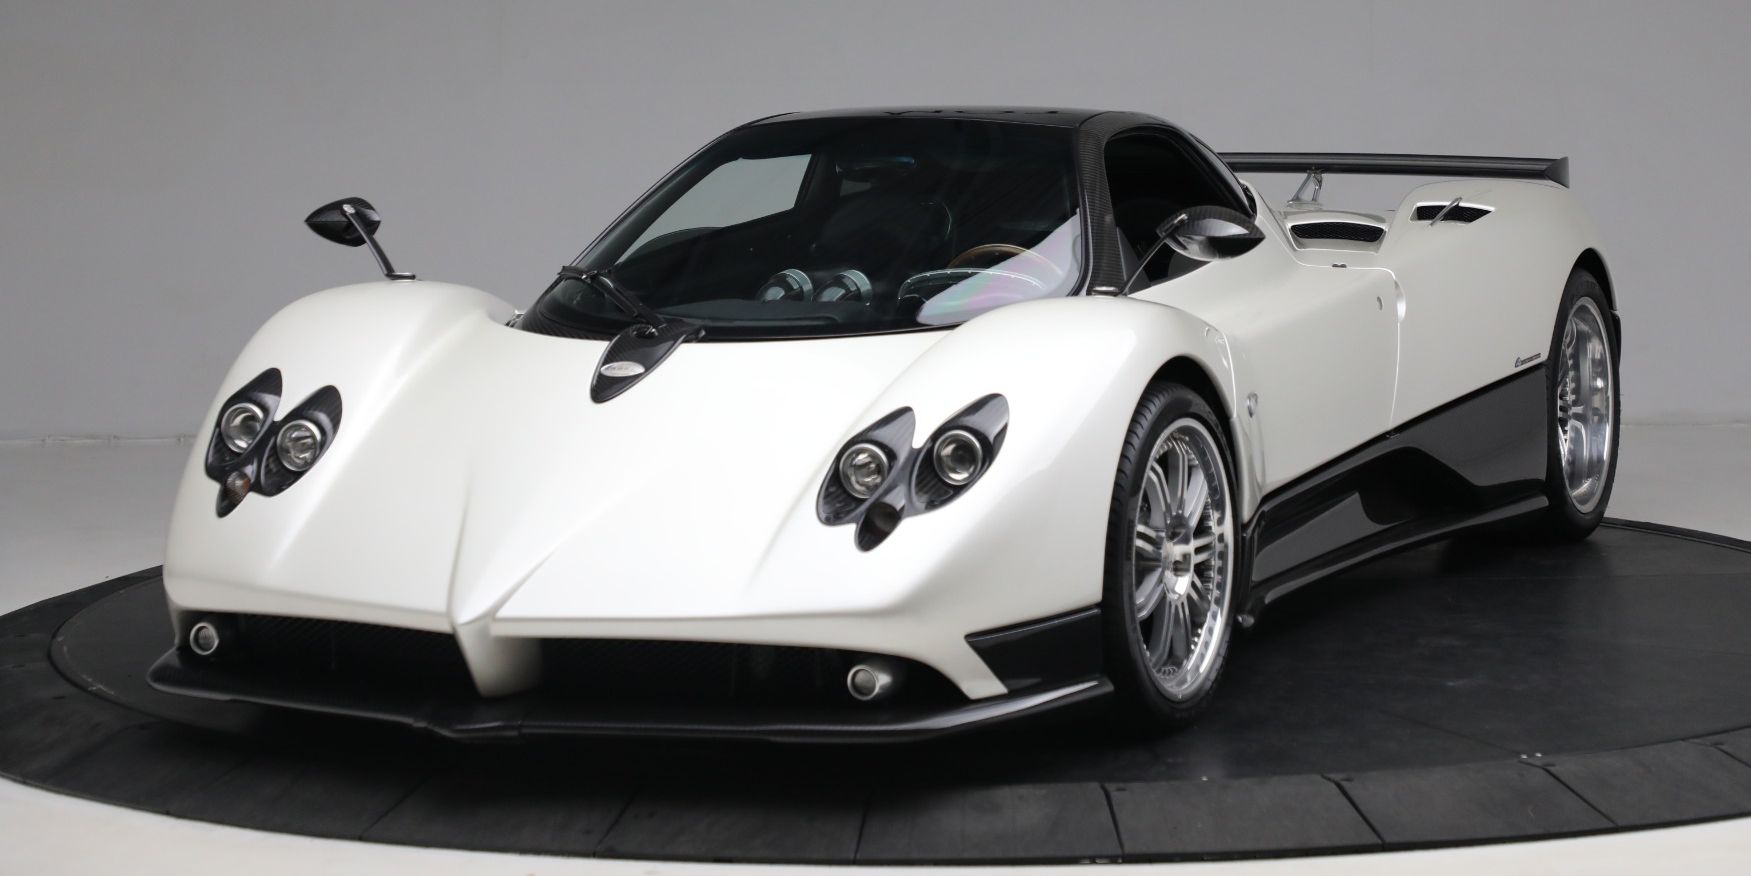 Here's Your Chance to Buy the First U.S.-Legal Pagani Zonda